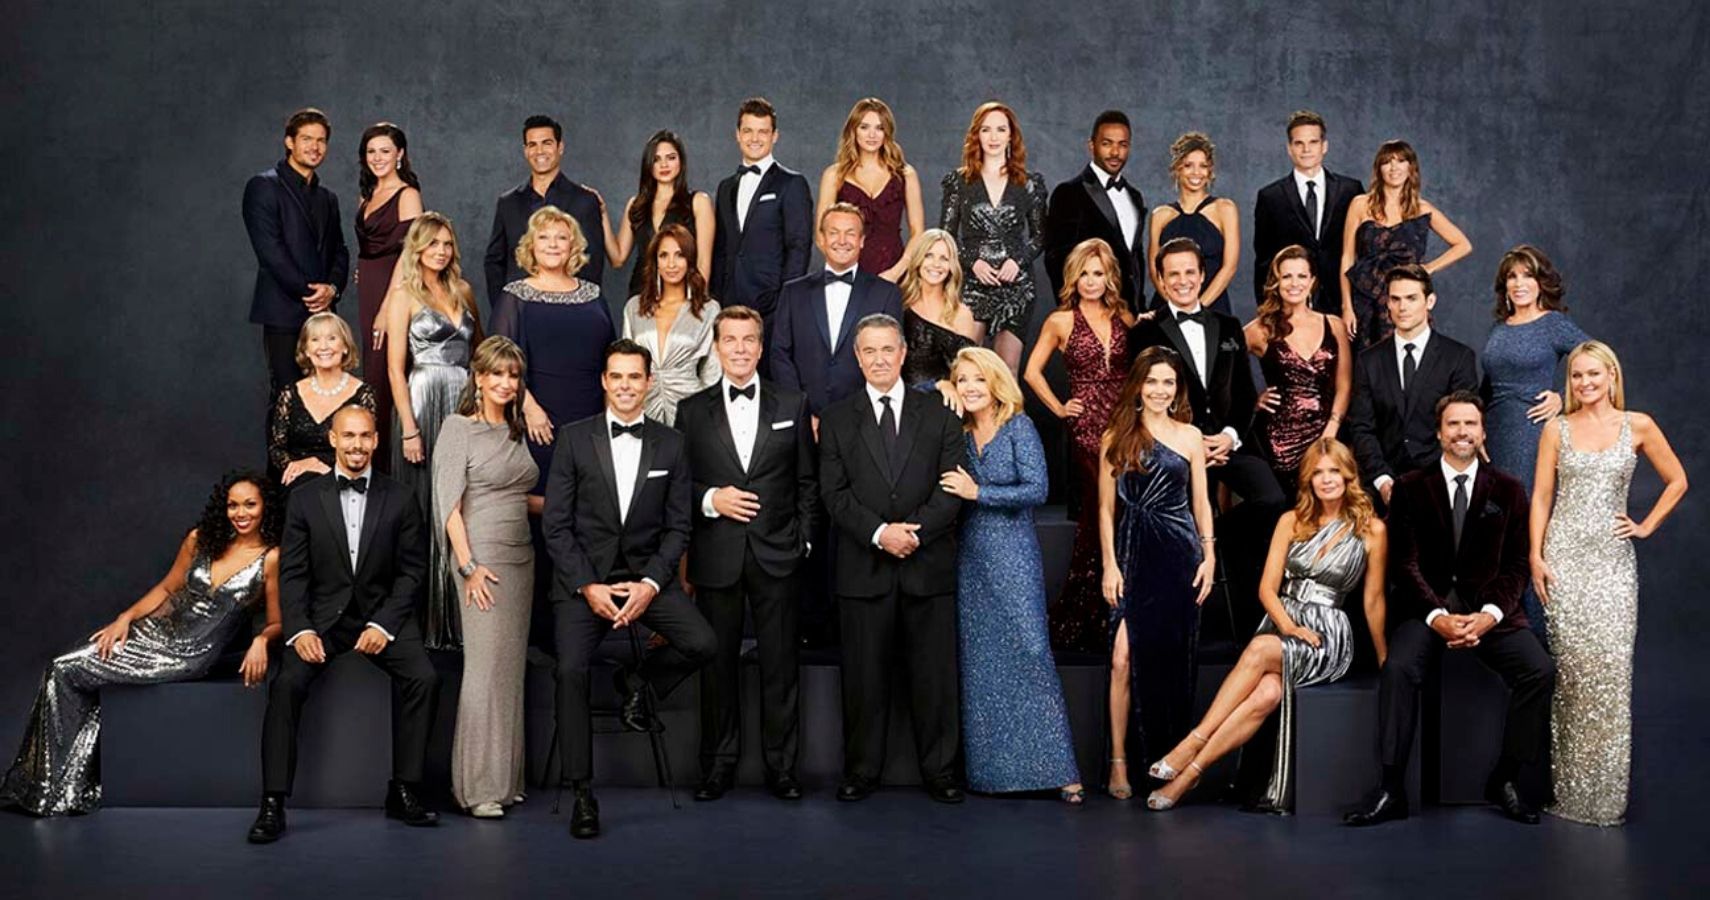 The Young And The Restless 10 Hidden Details About The Cast (That